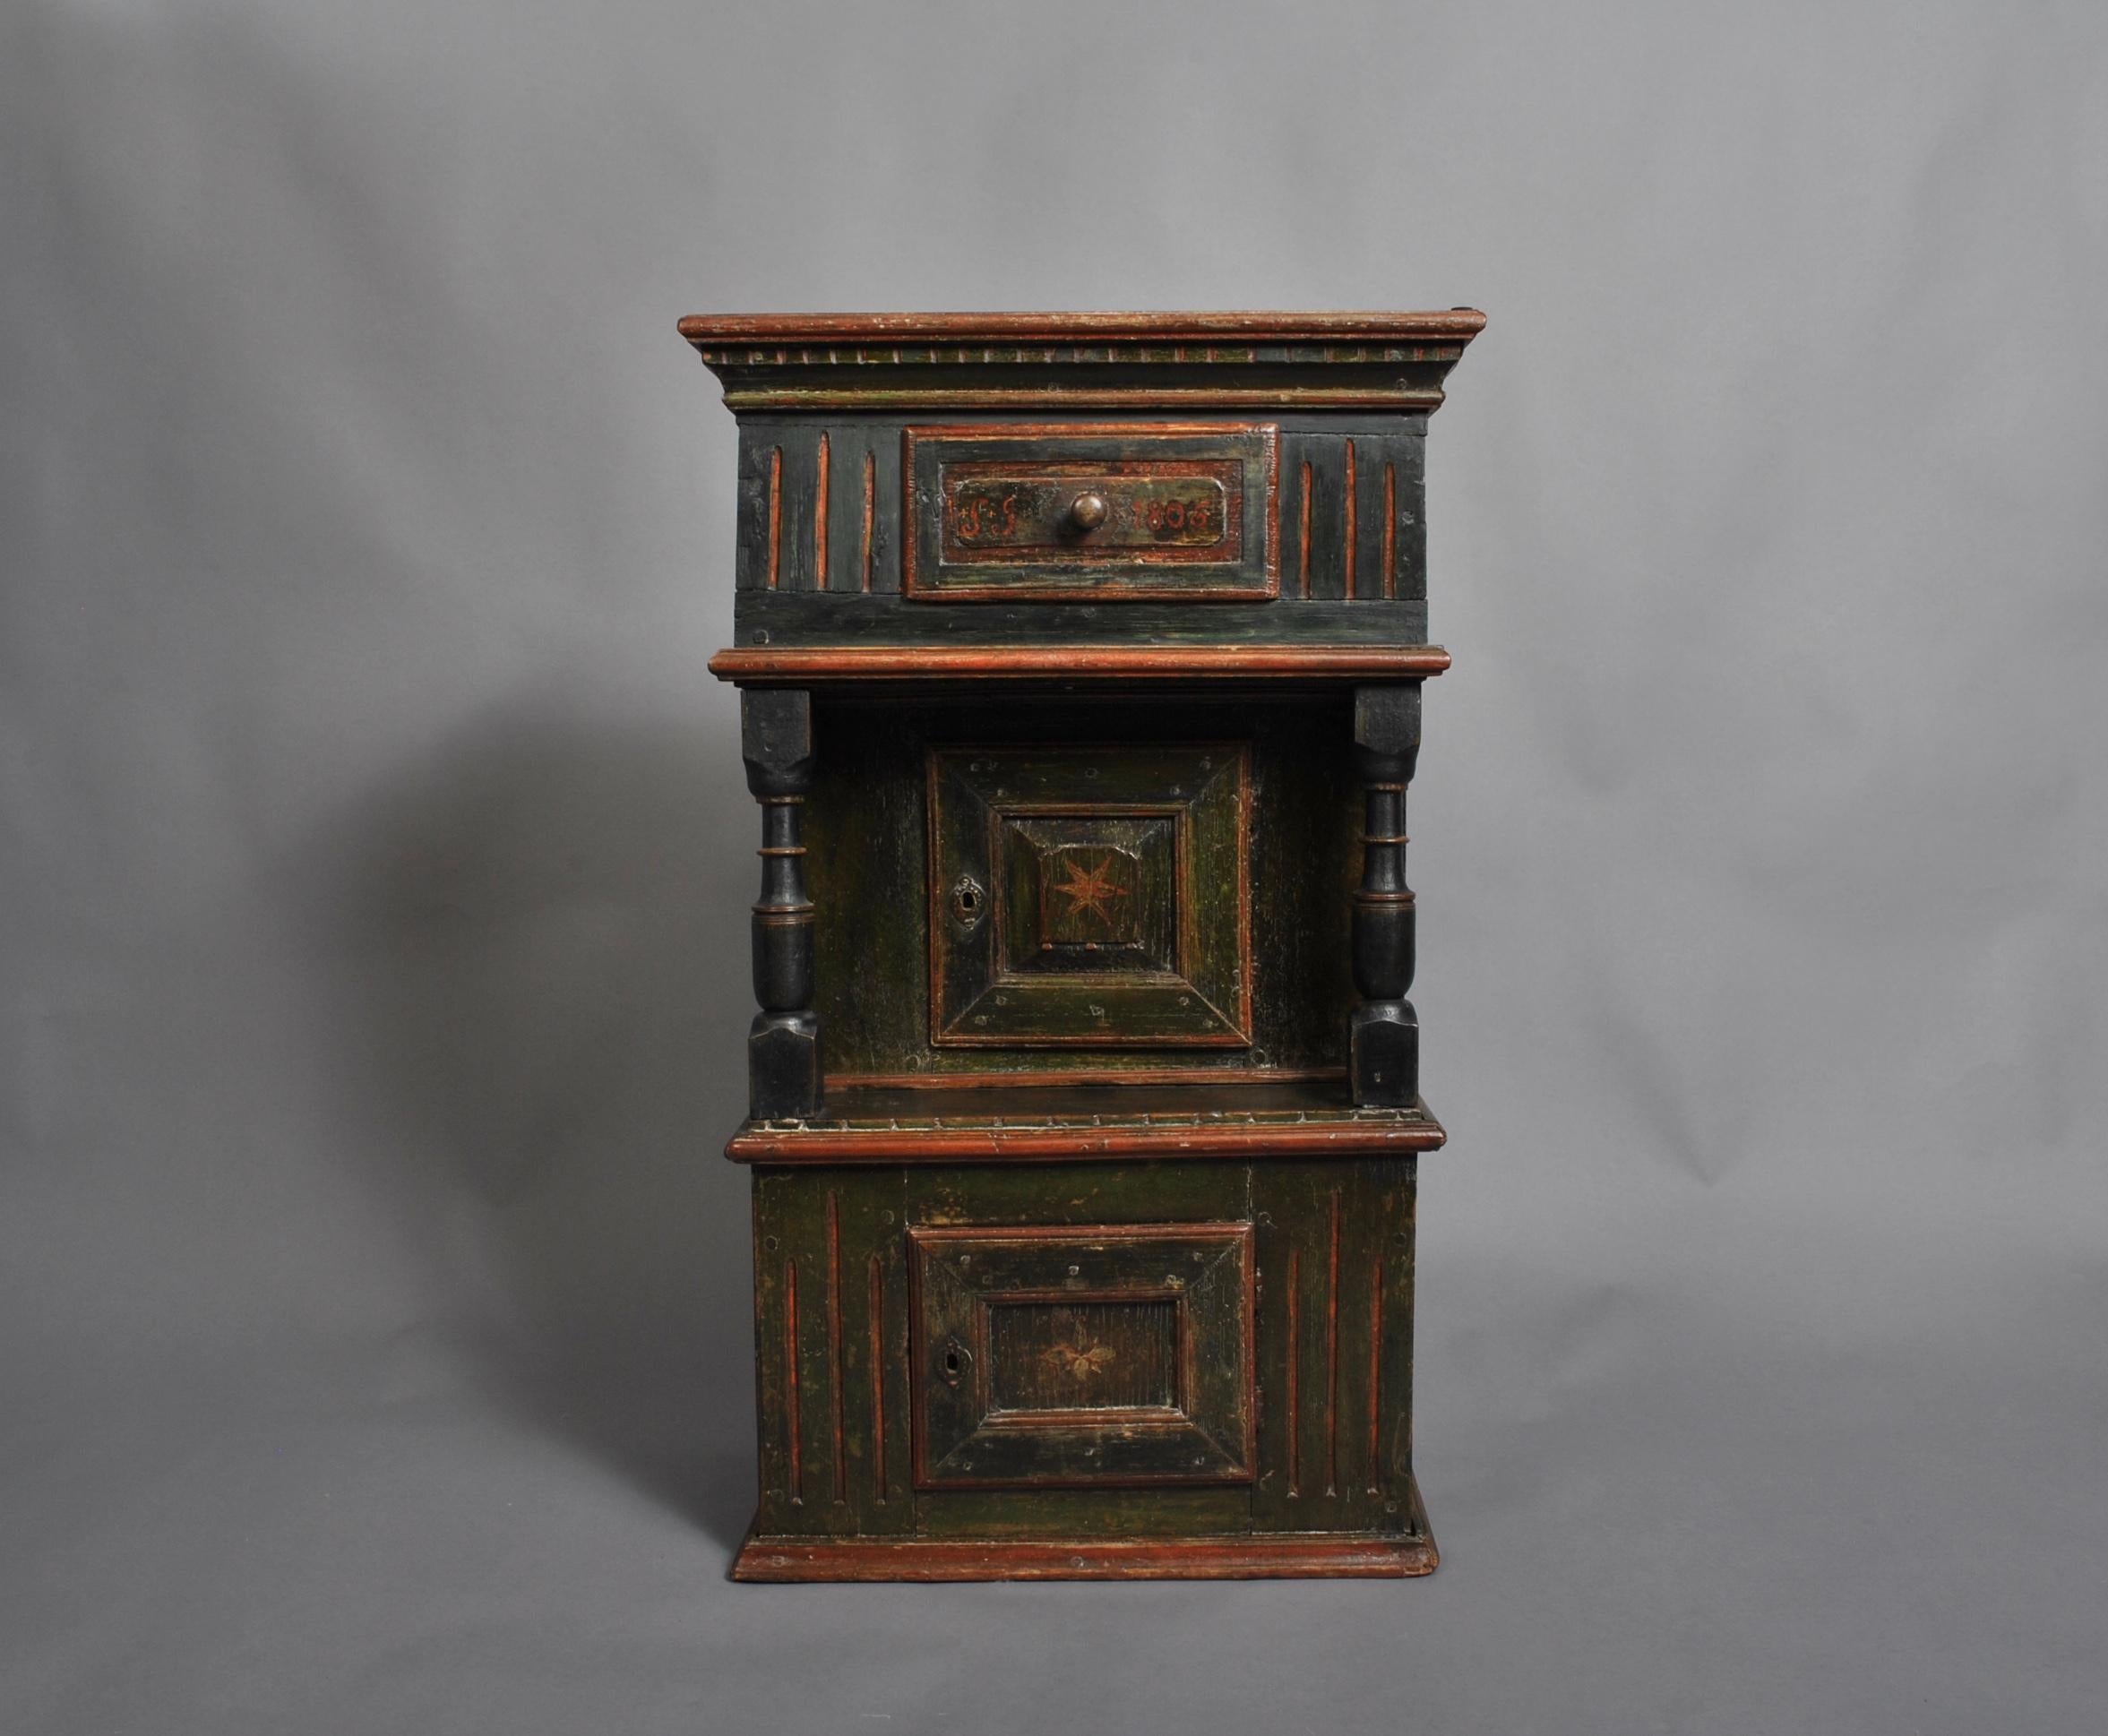 Handcrafted and folk painted rustic cabinet from Scandinavia dated 1806. Wonderful metal worked hand-wrought fittings. Oak and pine construction. For wall or counter mounting. A very characterful country piece.